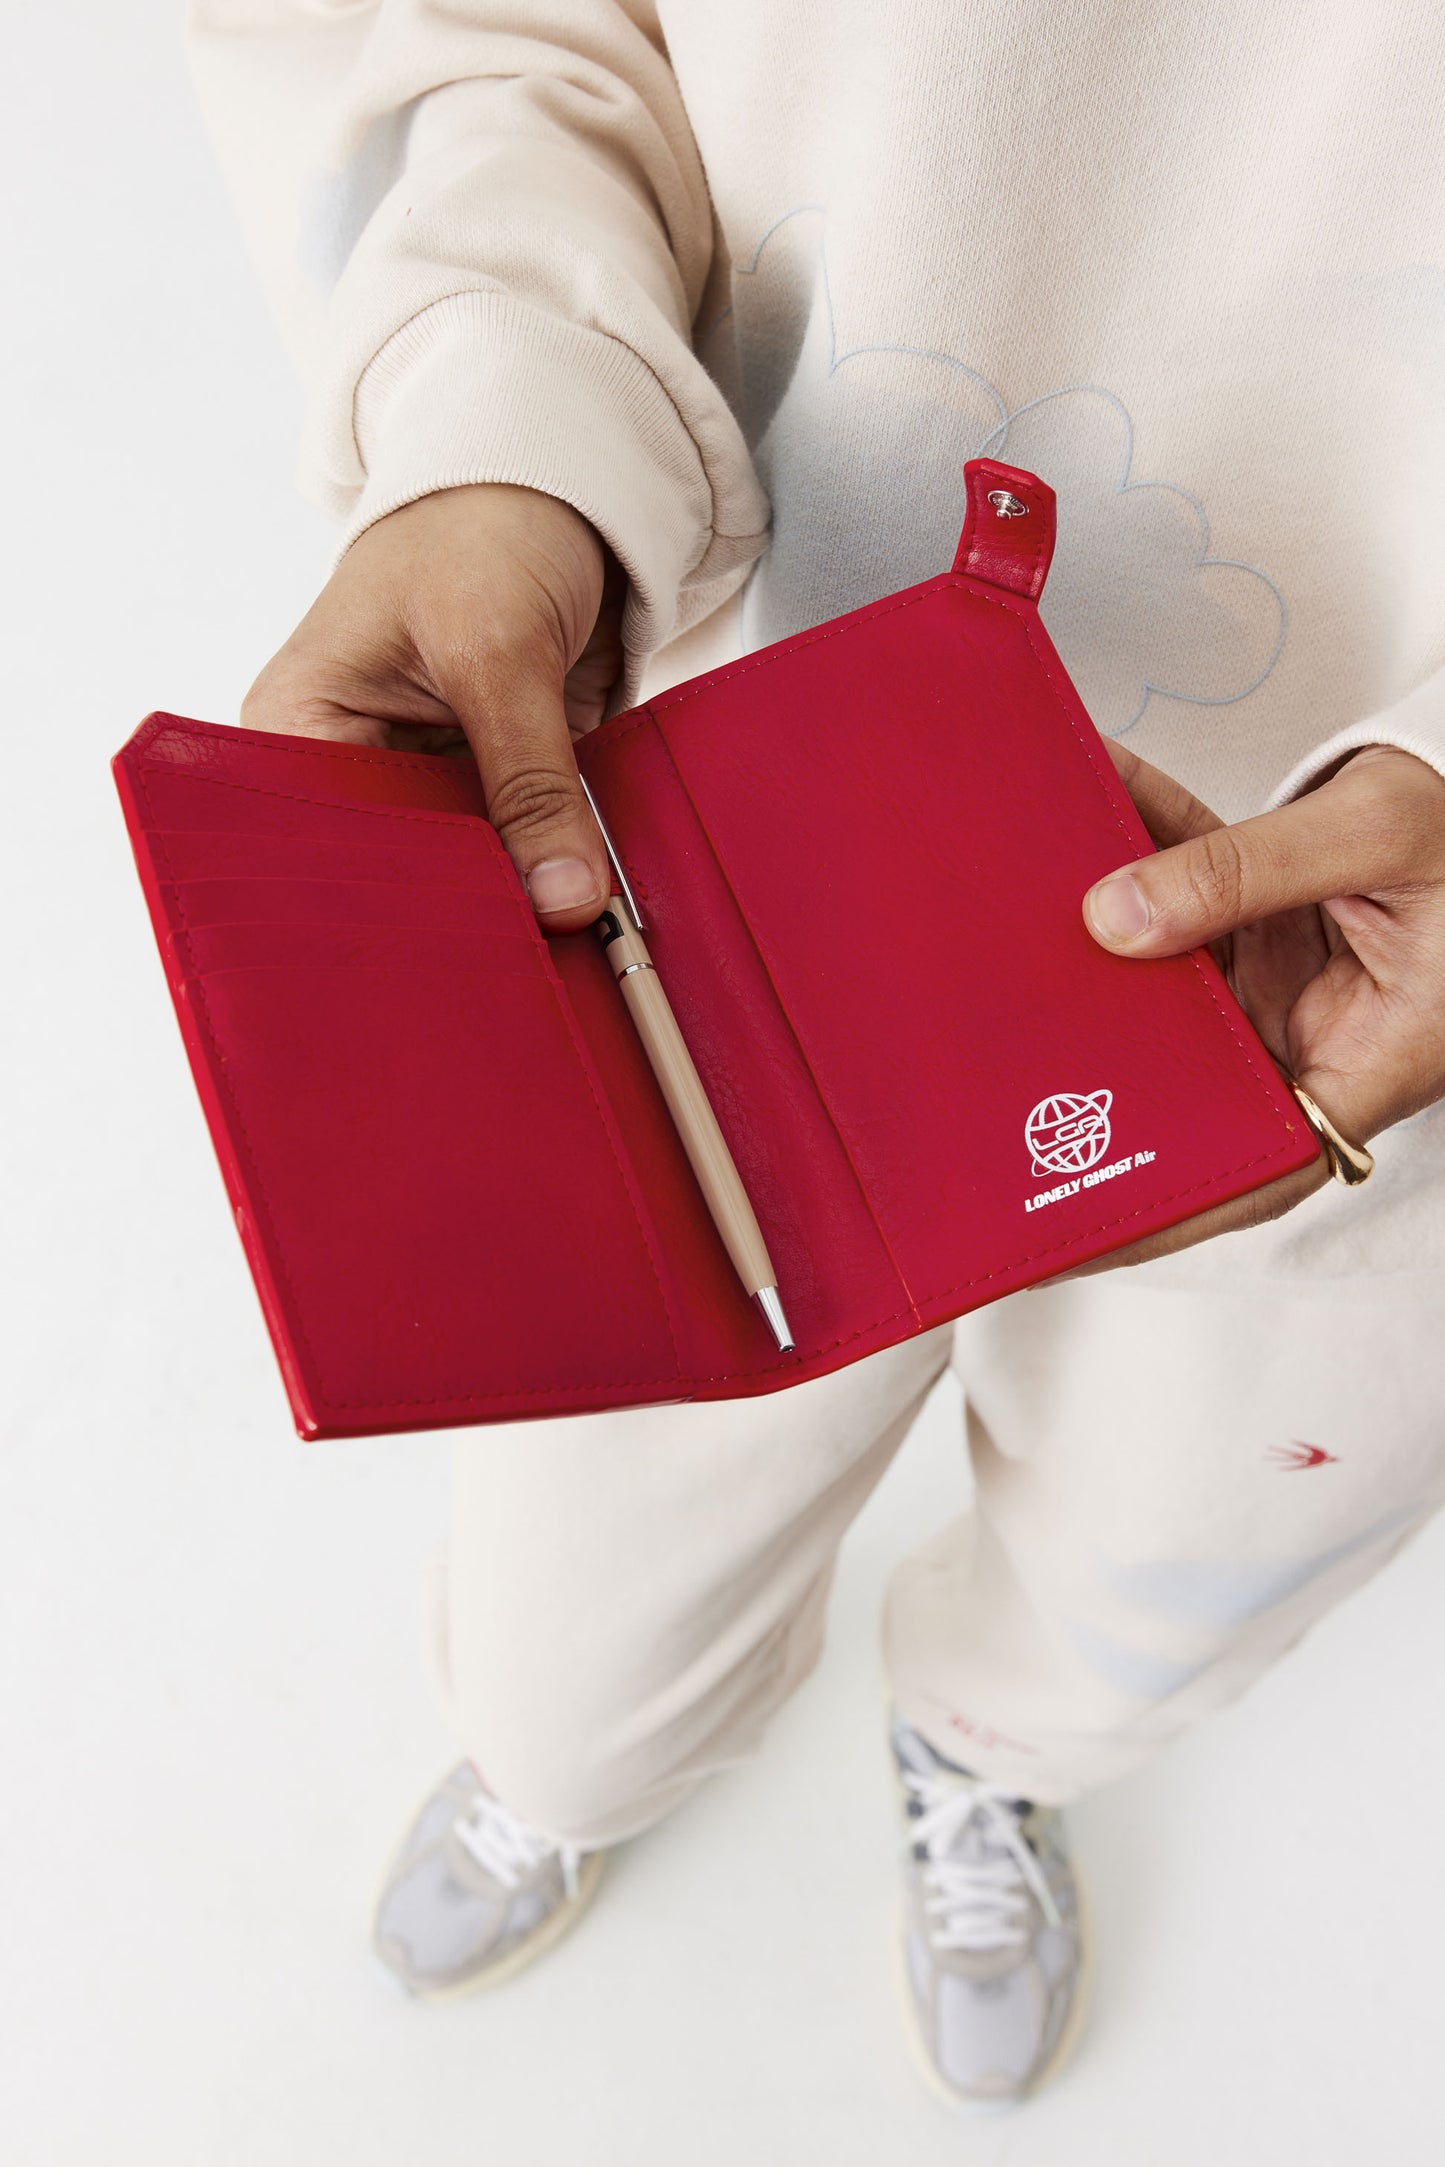 The Passport & Luggage Tag Set in Text Me Red